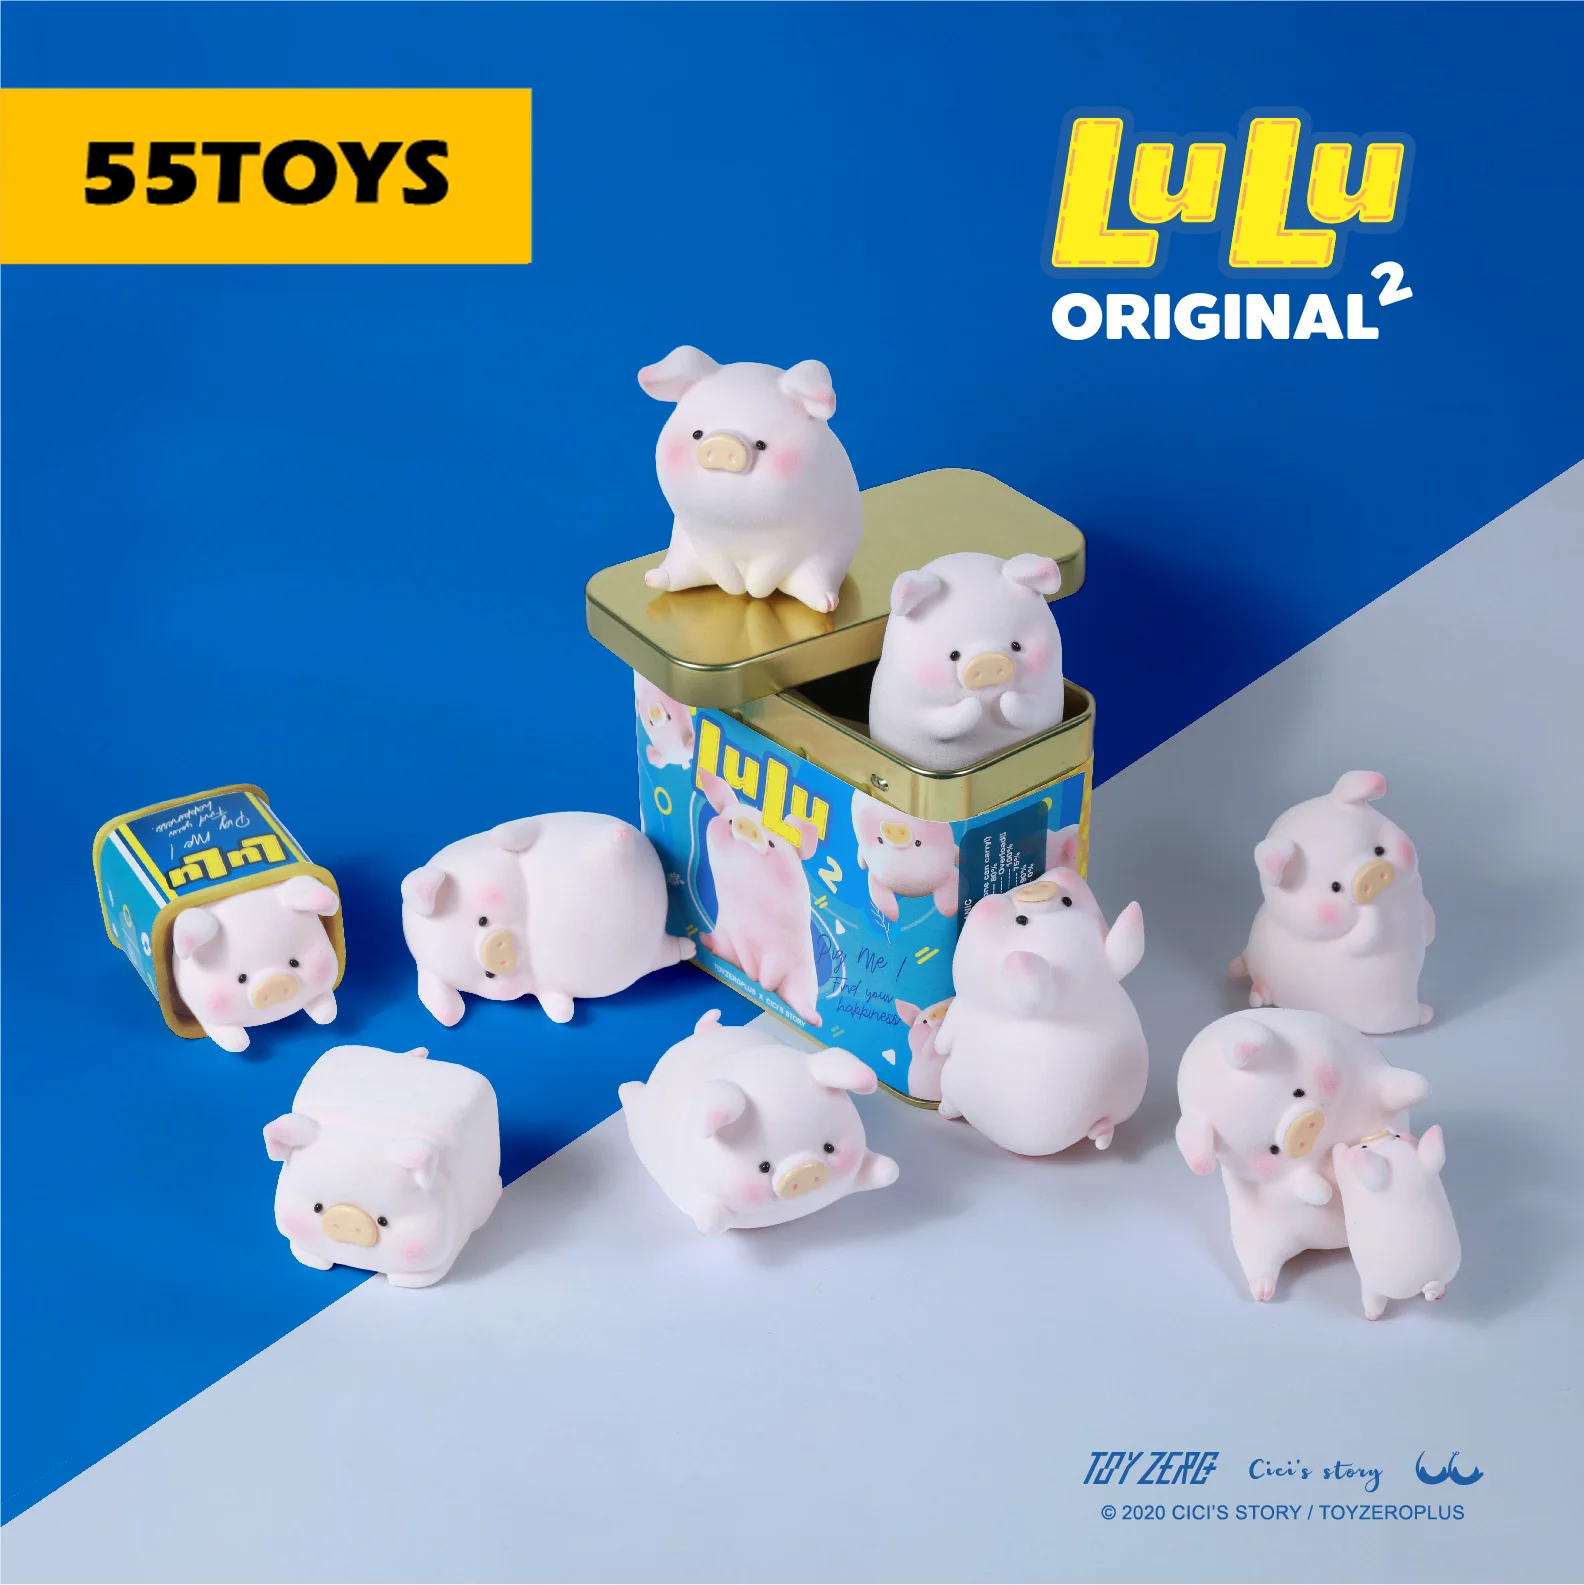 

55TOYS Canned Pig LuLu Classic Series 2 Blind Box Toys Blind Anime Animal Figures Doll Cute Girl Birthday Gift Story